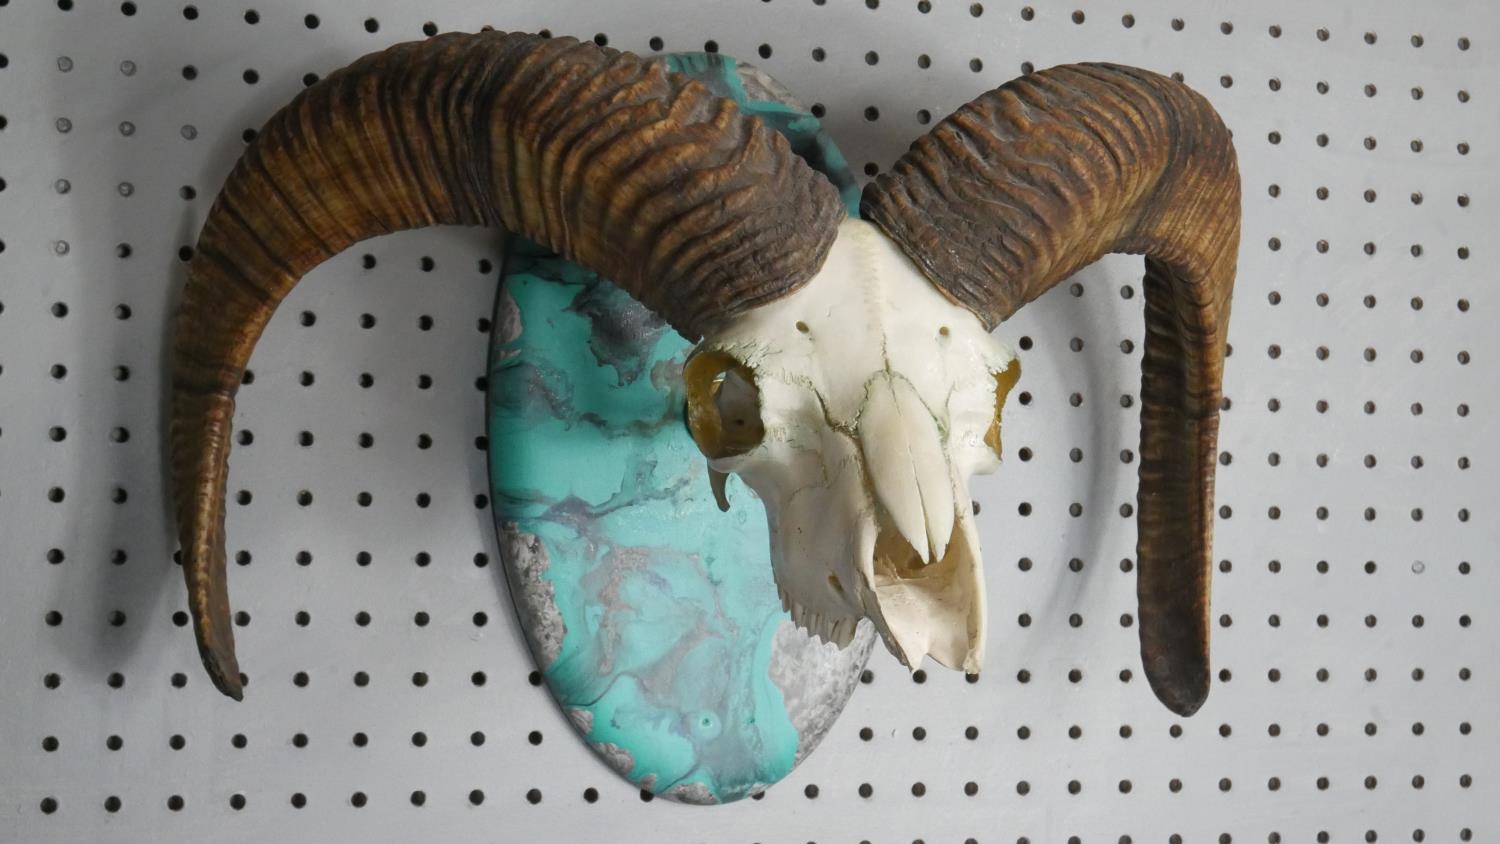 A mounted Rams skull and horns with gilded interior, mounted on a turquoise marble effect resin - Image 3 of 5